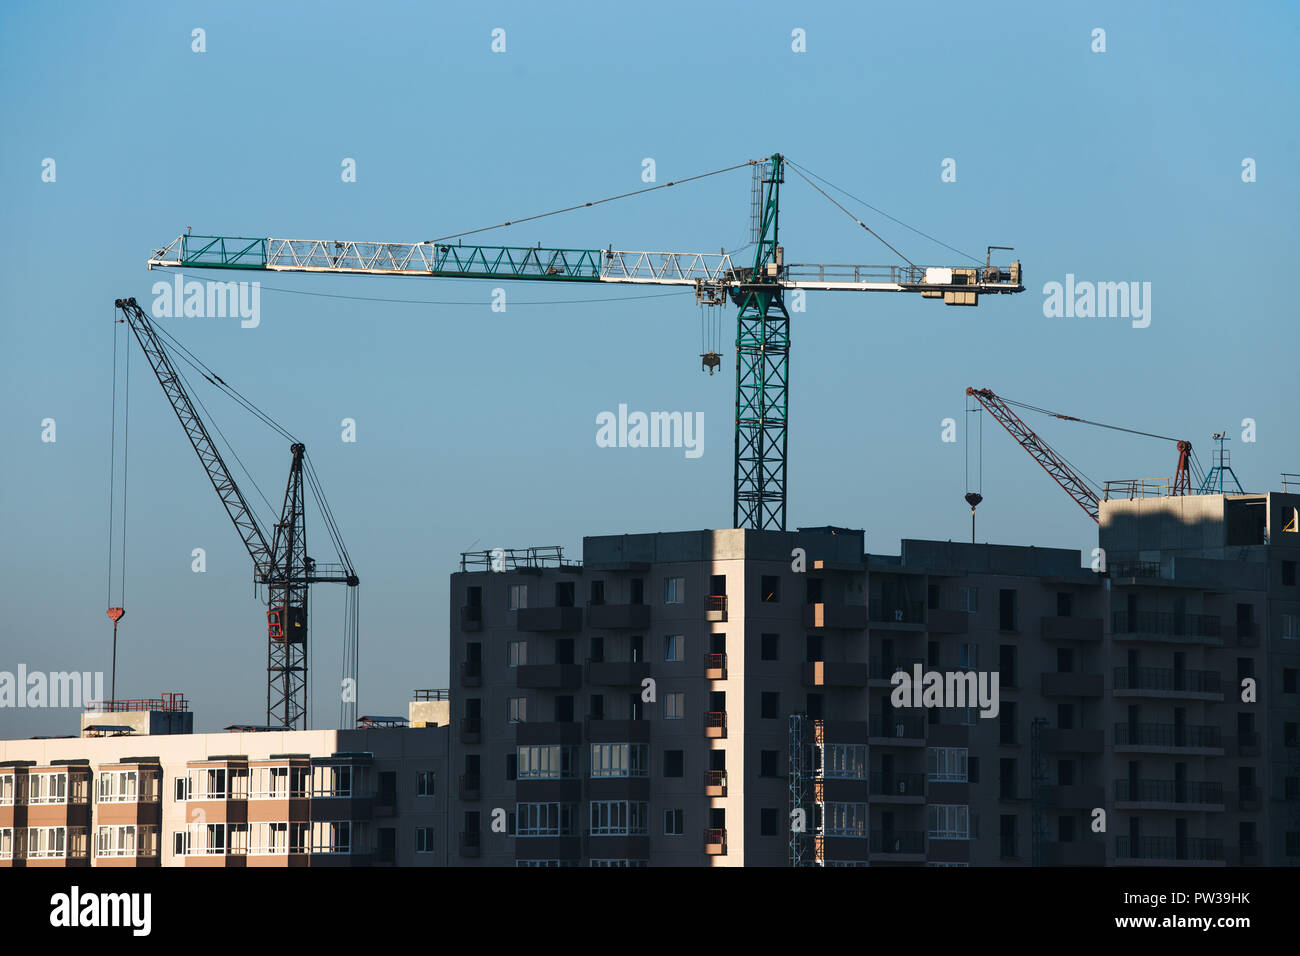 Construction of a residential high-rise building. Photo of a construction crane installing floor decks. Stock Photo